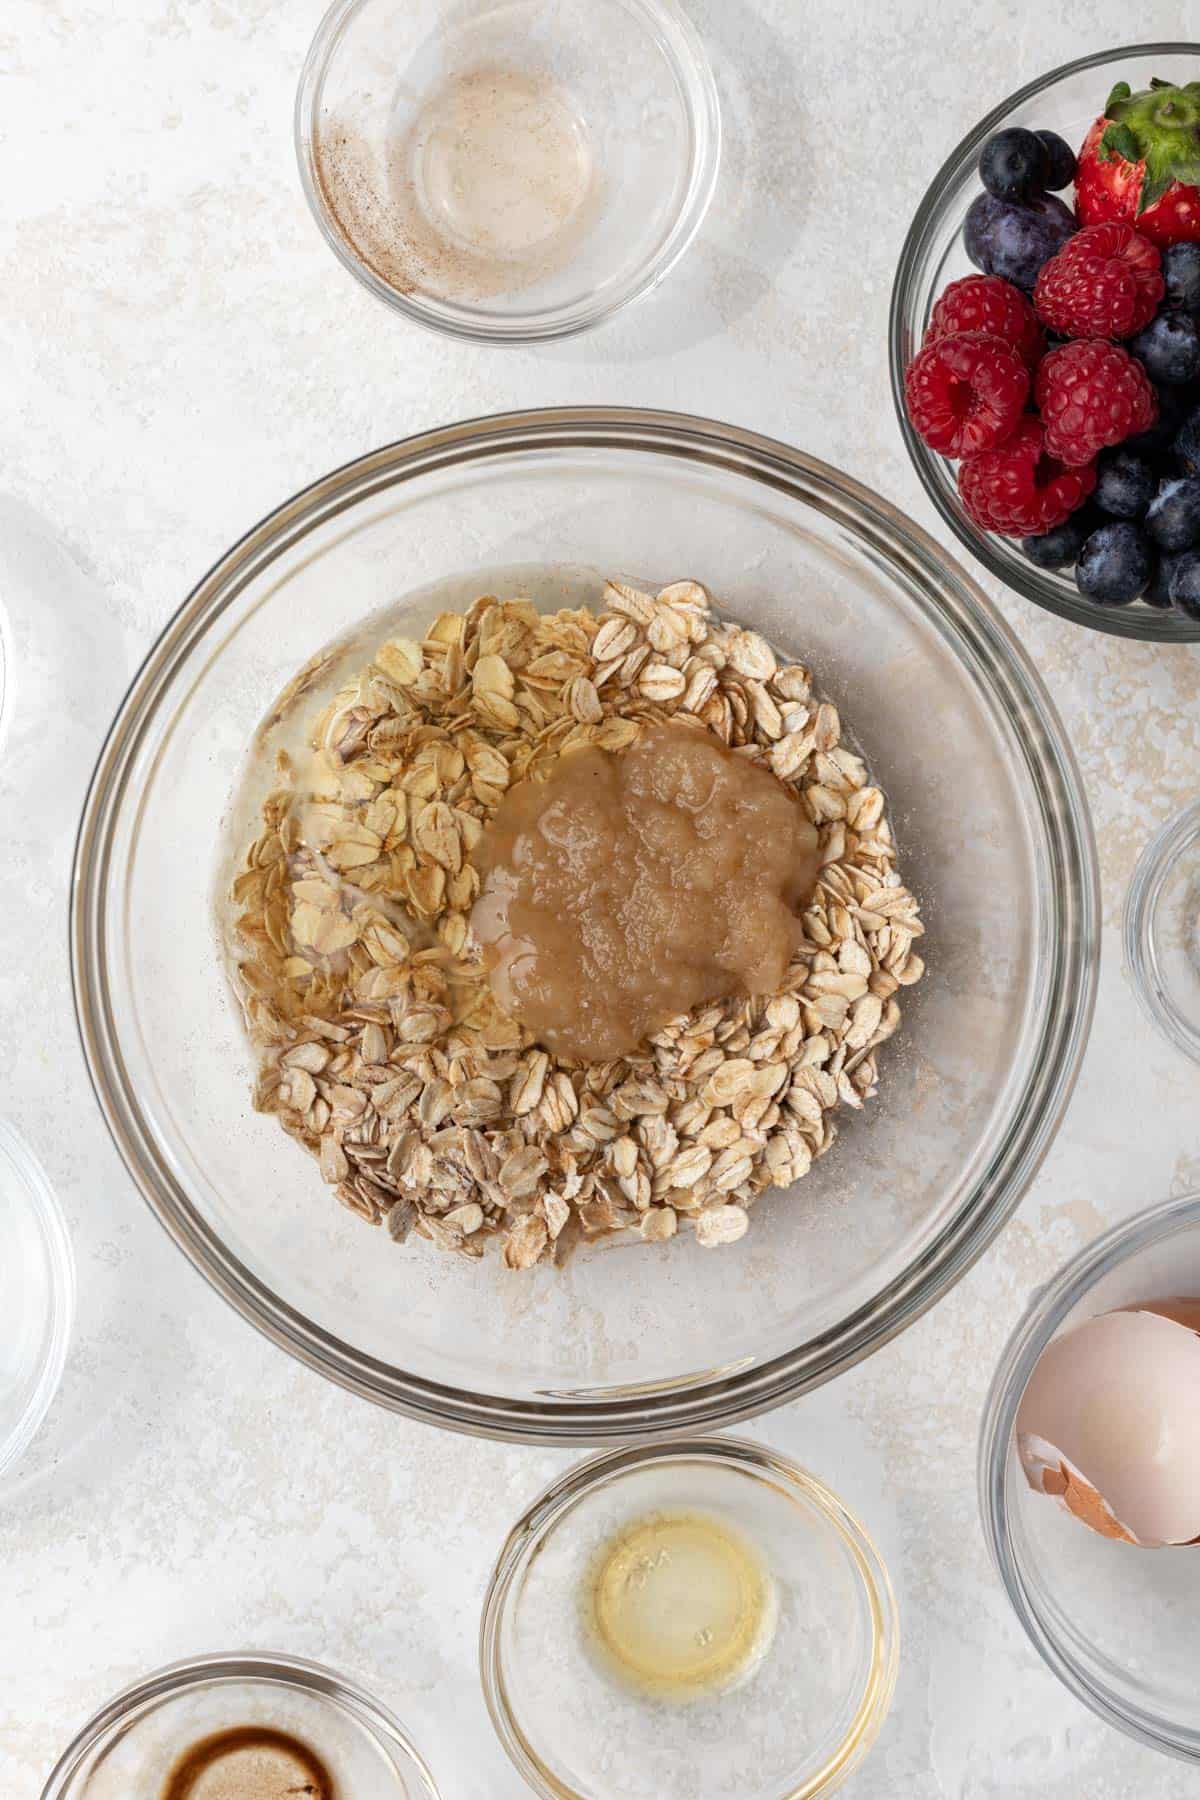 Dry and wet ingredients for baked oatmeal in a mixing bowl.